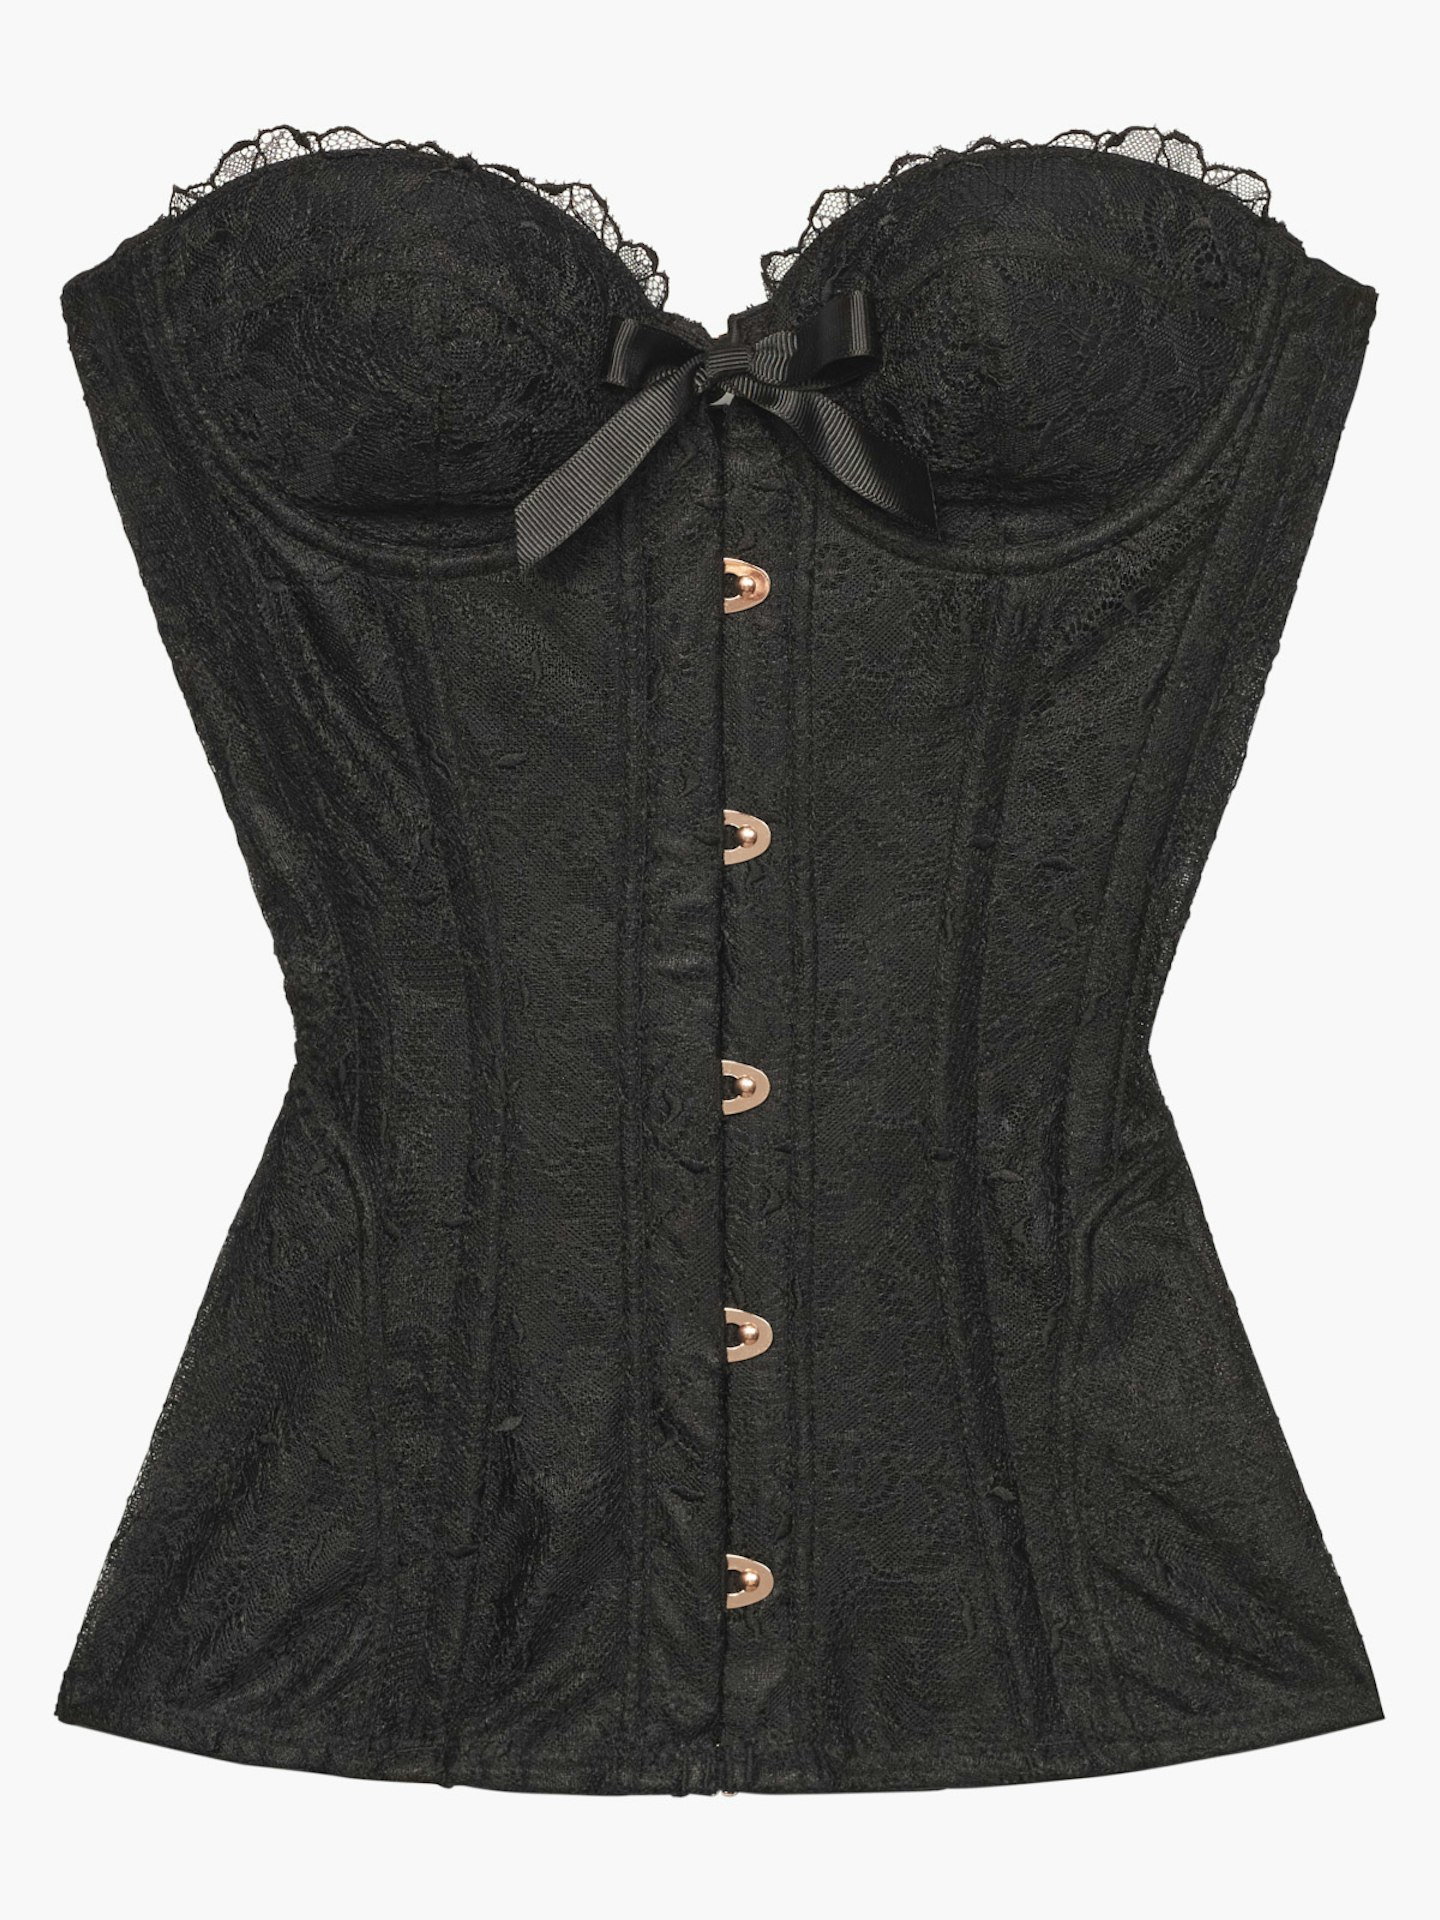 Embroidered Lace Corset, £32